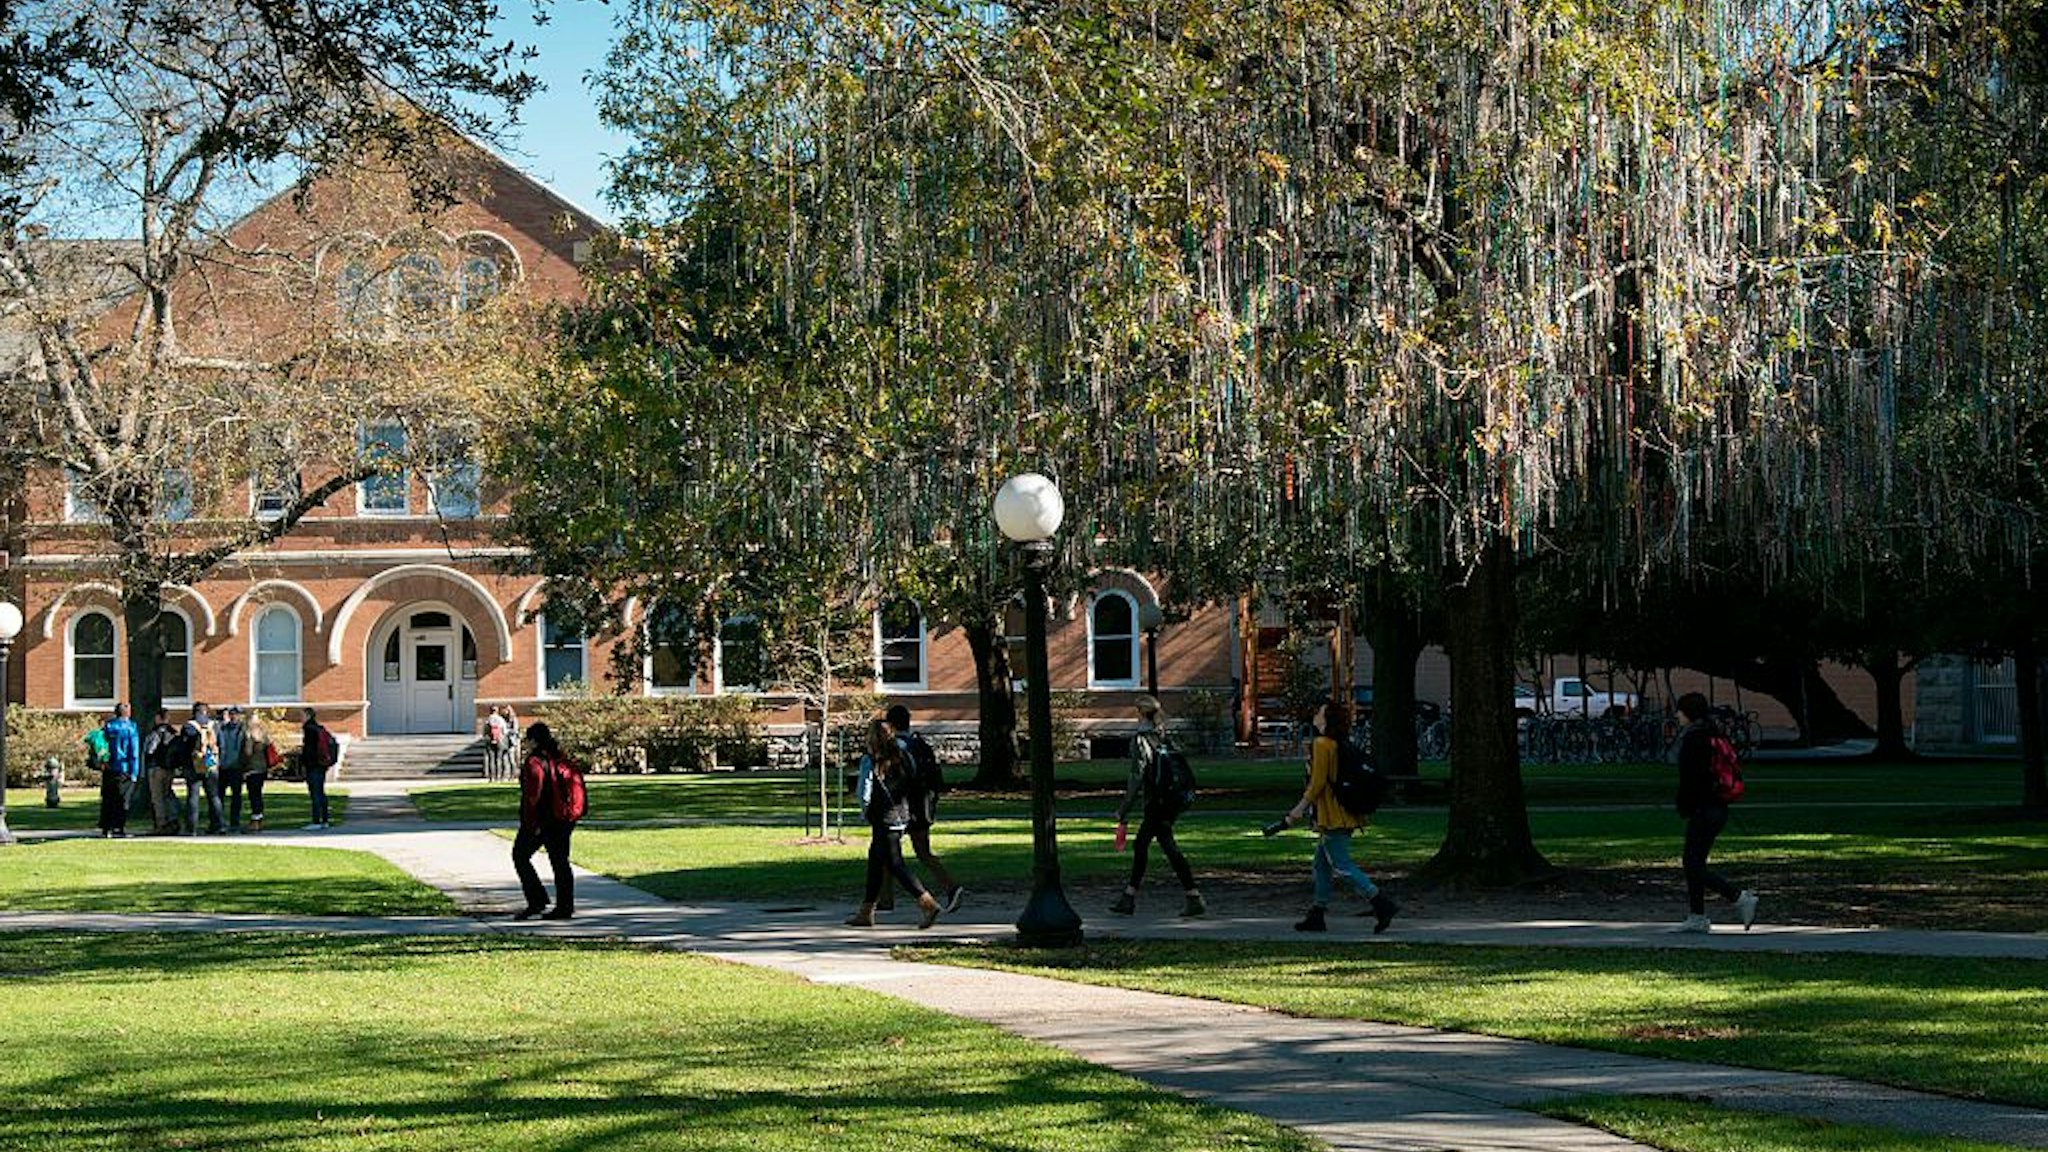 Beads hang from tree limbs on the campus of Tulane University, New Orleans, Louisiana.